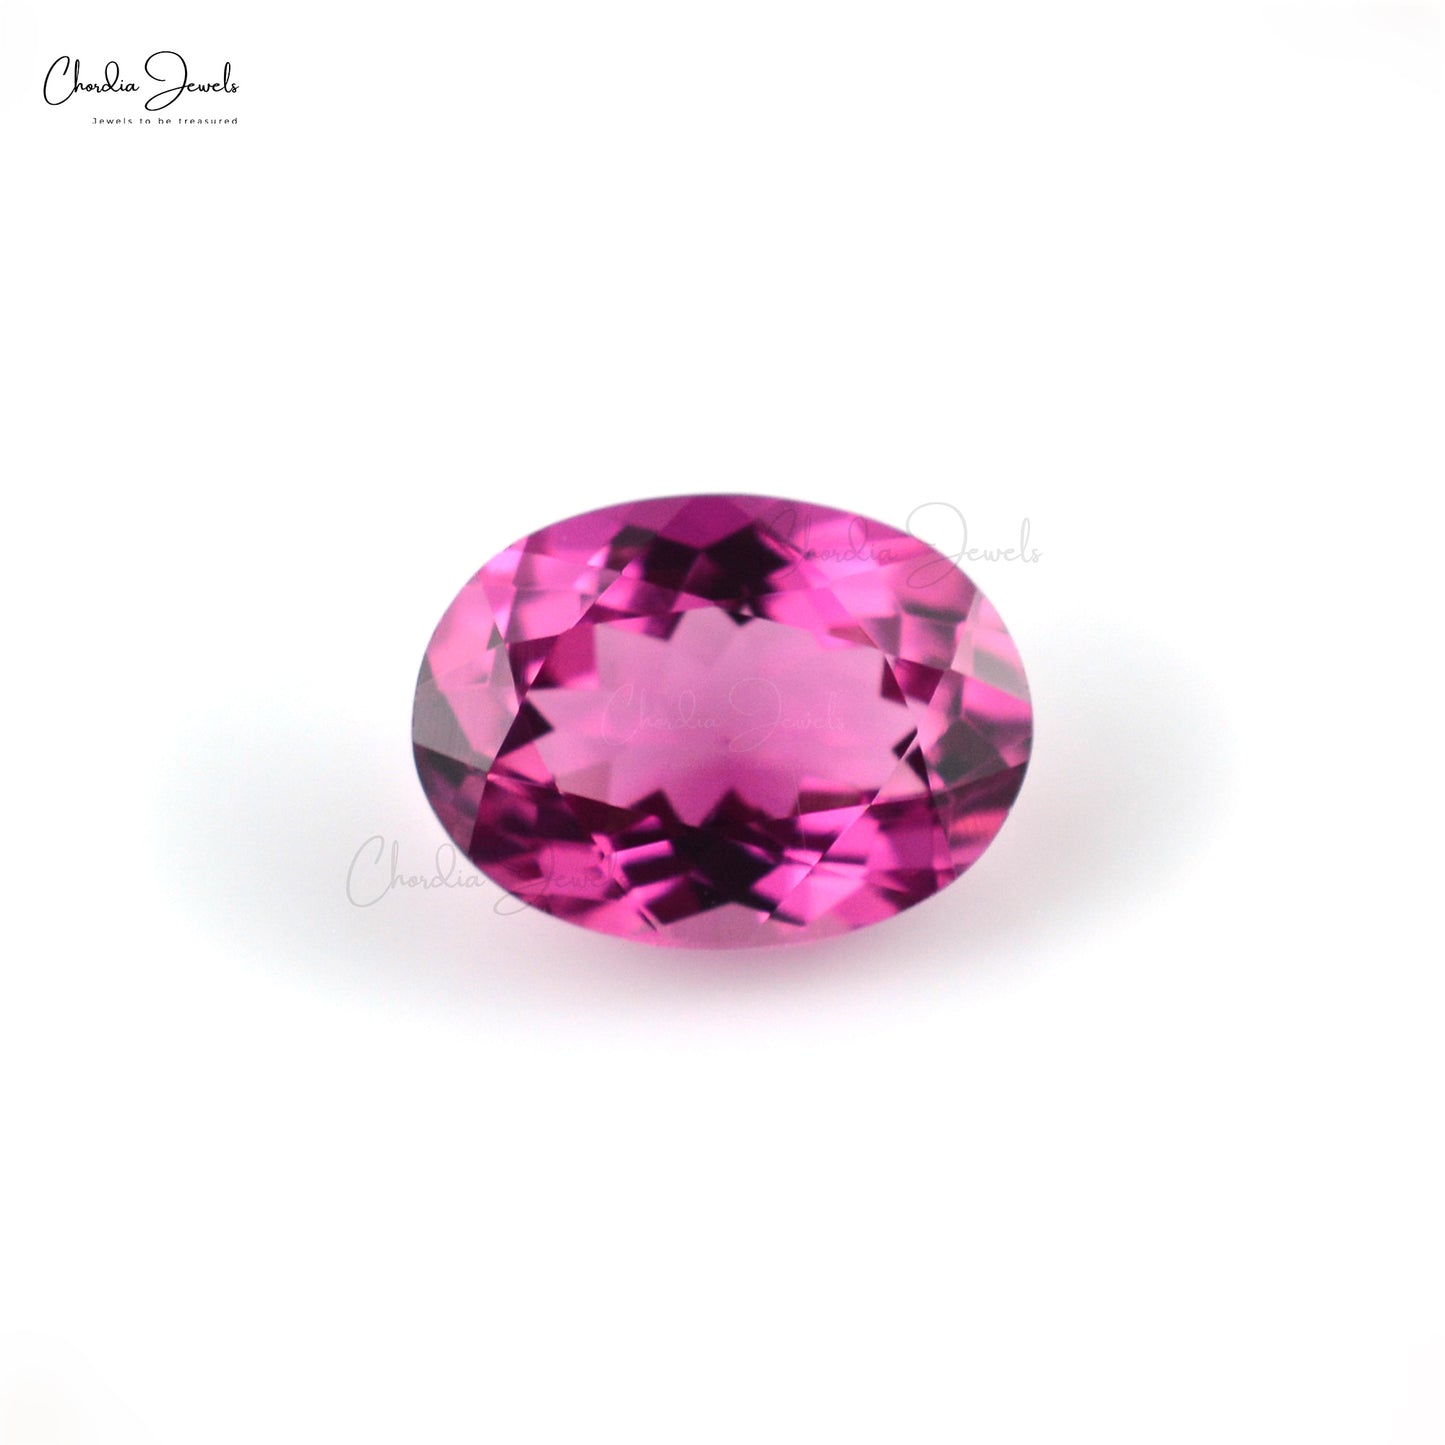 AAA Pink Tourmaline 1.35 Carat Natural Oval Cut Gemstone for Making Rings, 1 Piece